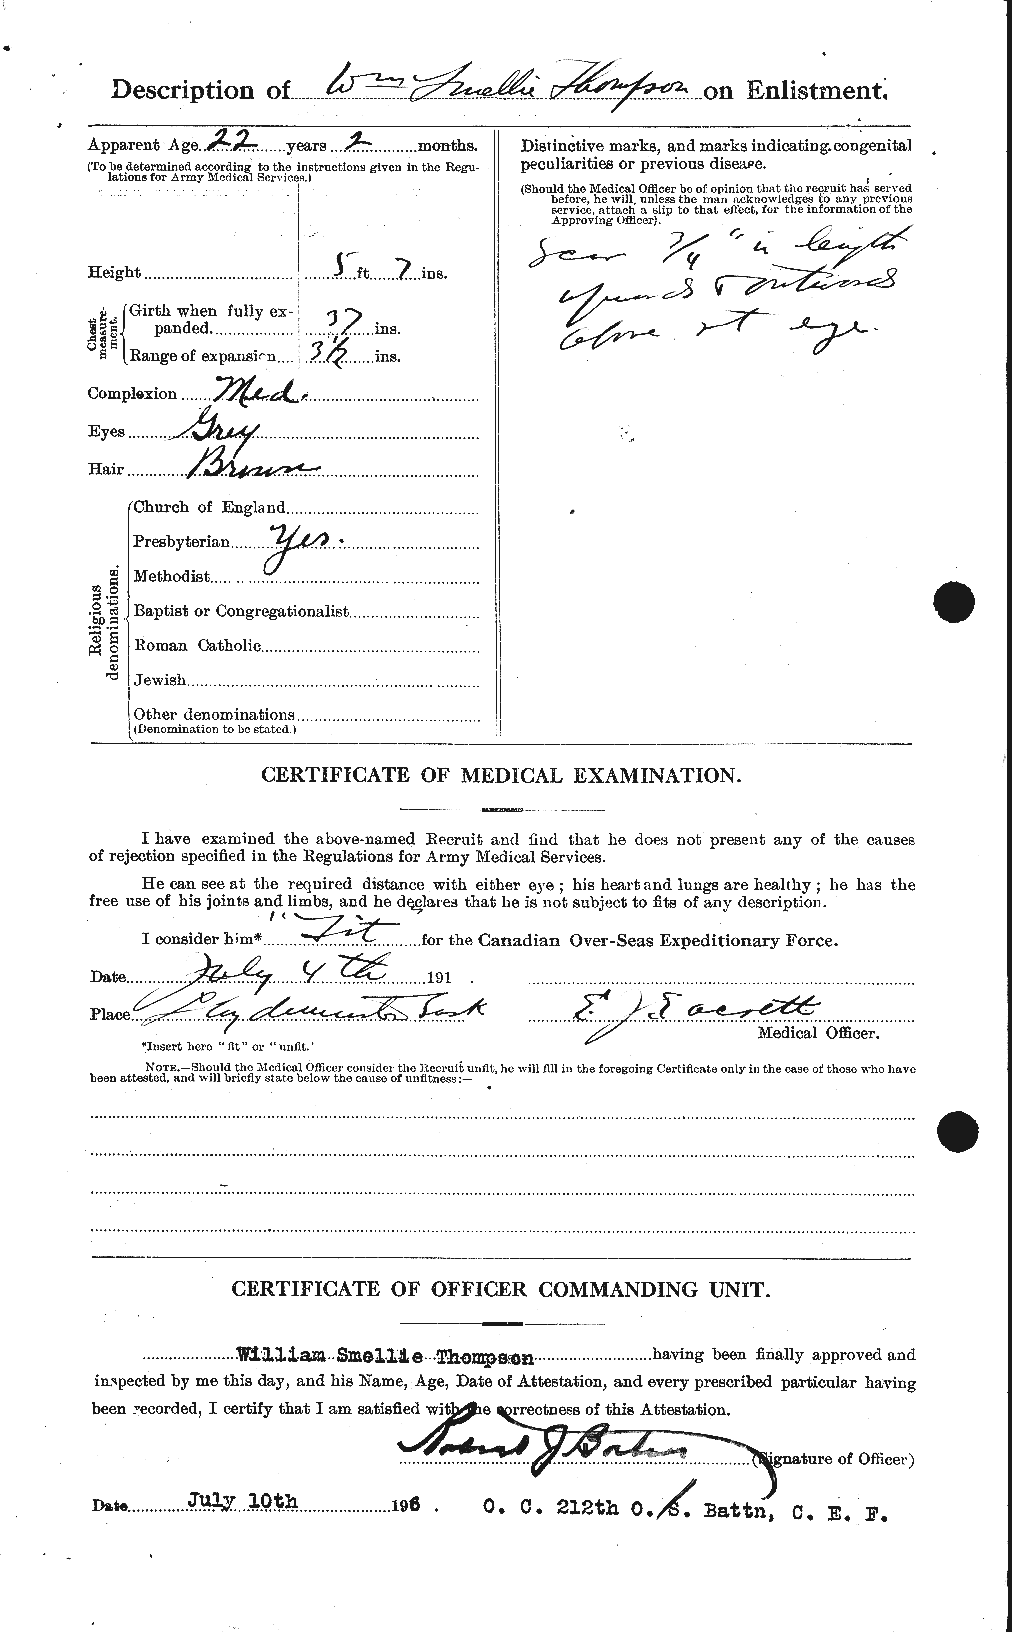 Personnel Records of the First World War - CEF 635652b